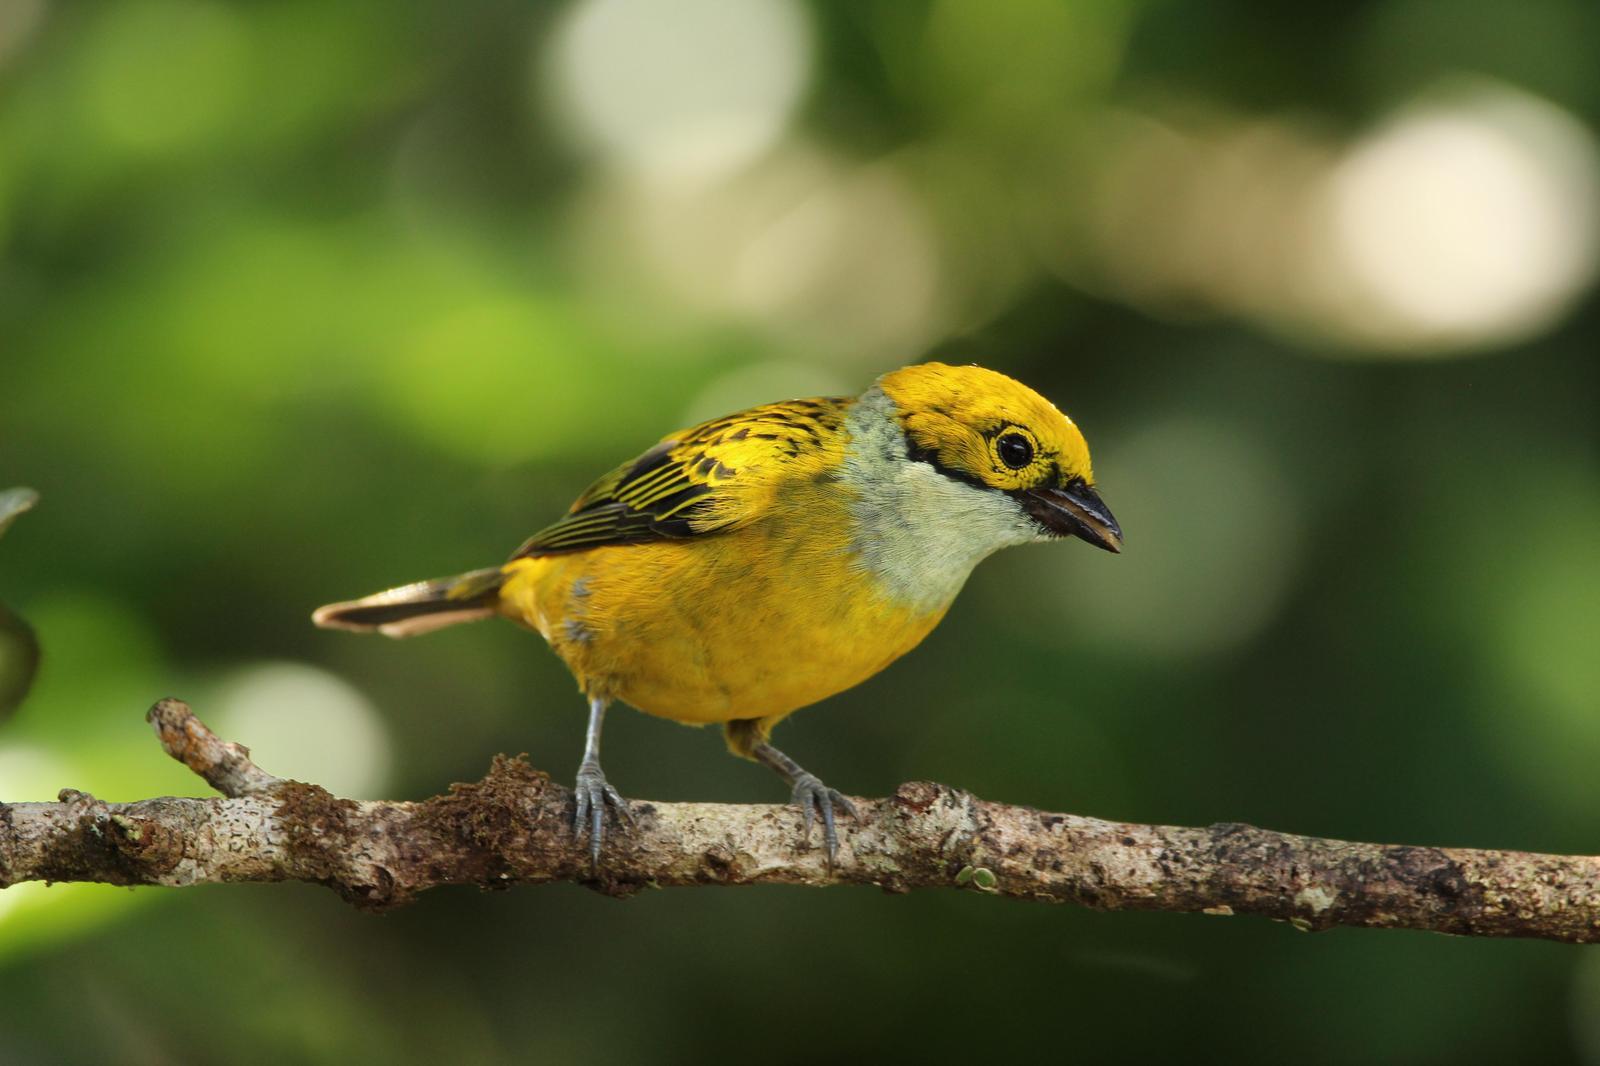 Silver-throated Tanager Photo by Pedro Bernal